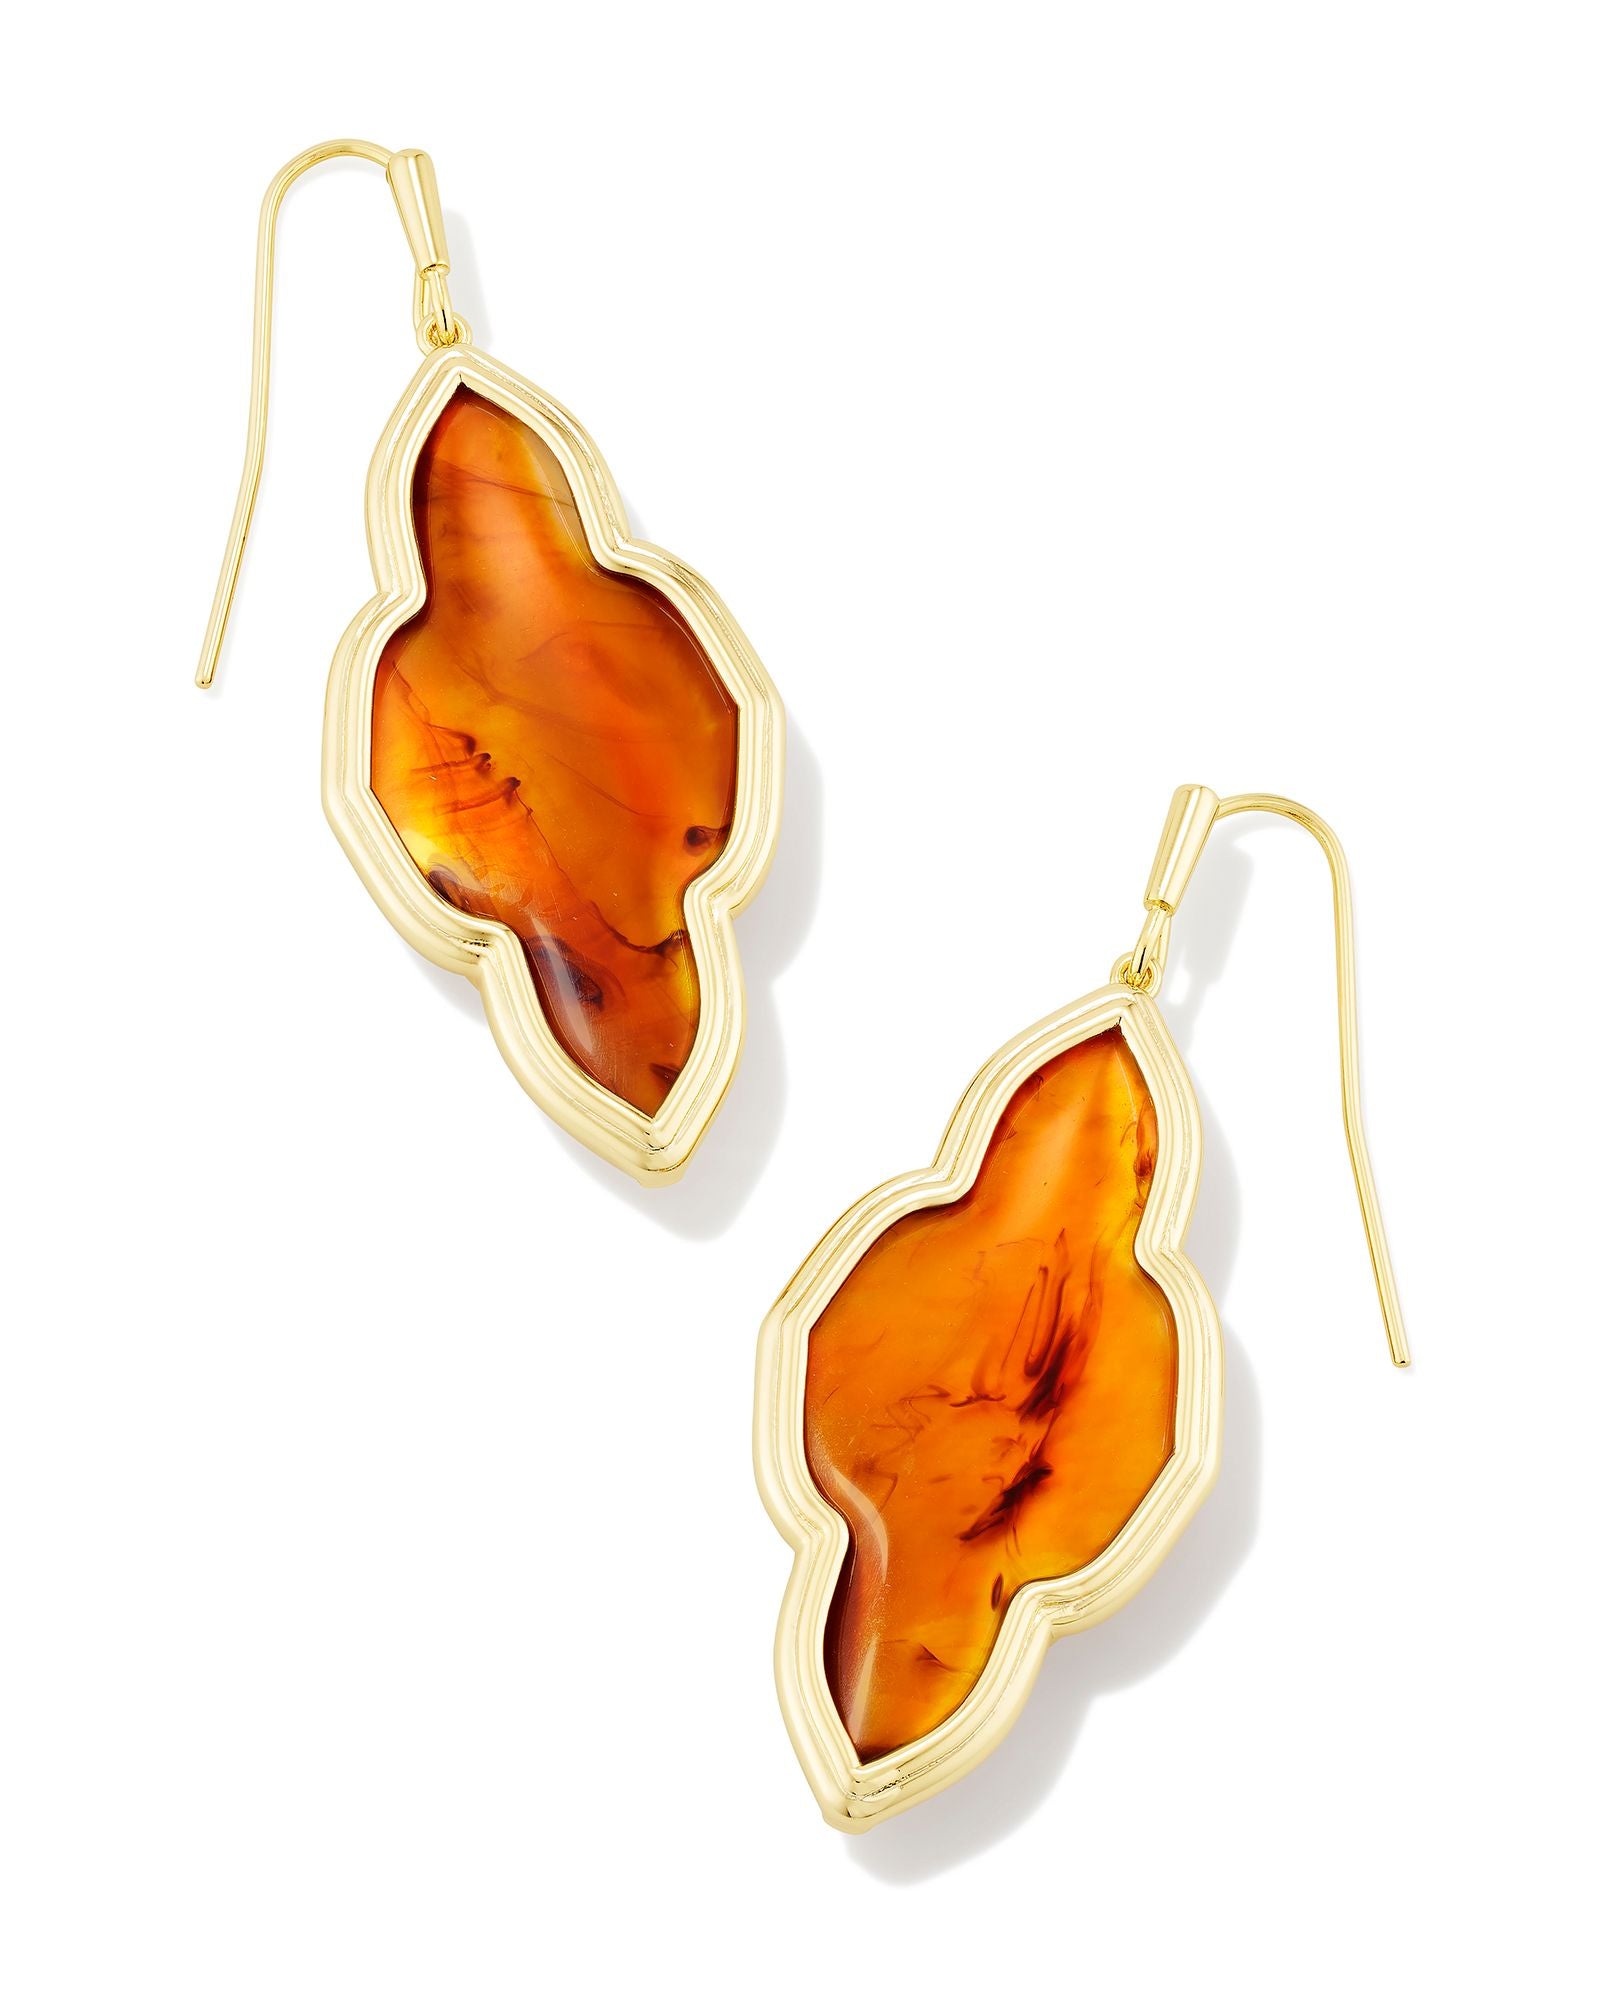 Kendra Scott Abbie Dangle Earrings in Marbled Amber Illusion and Gold Plated